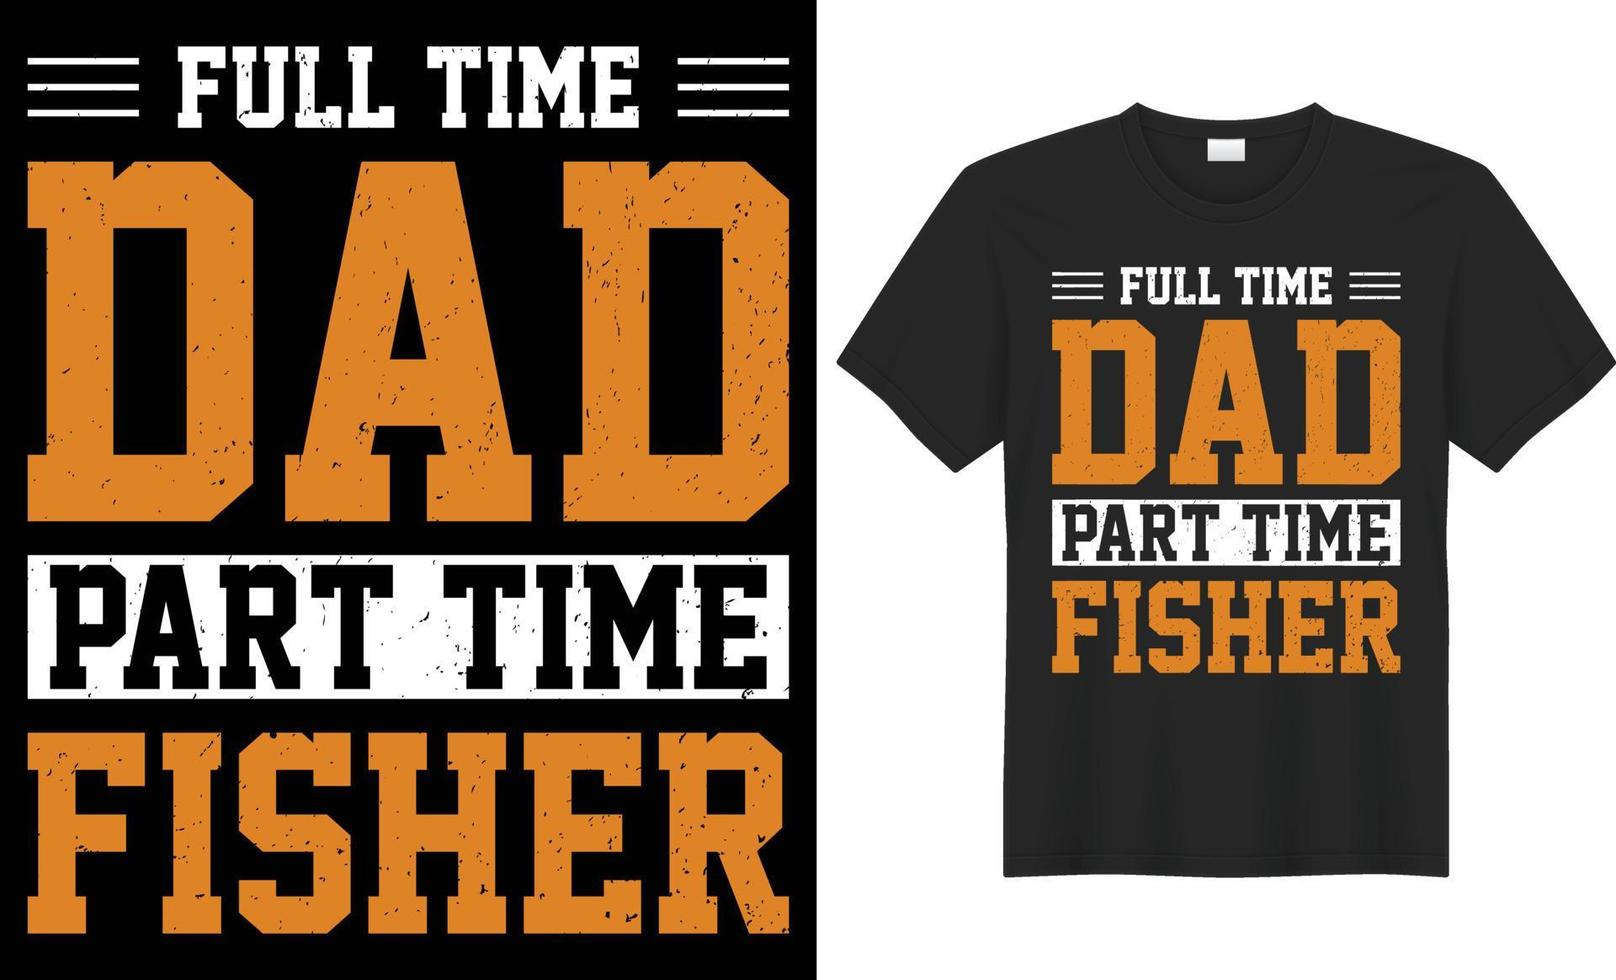 Full time dad part time fisher typography vector t-shirt design. Perfect for print items and bags, template, poster, banner. Handwritten vector illustration. Isolated on black background.